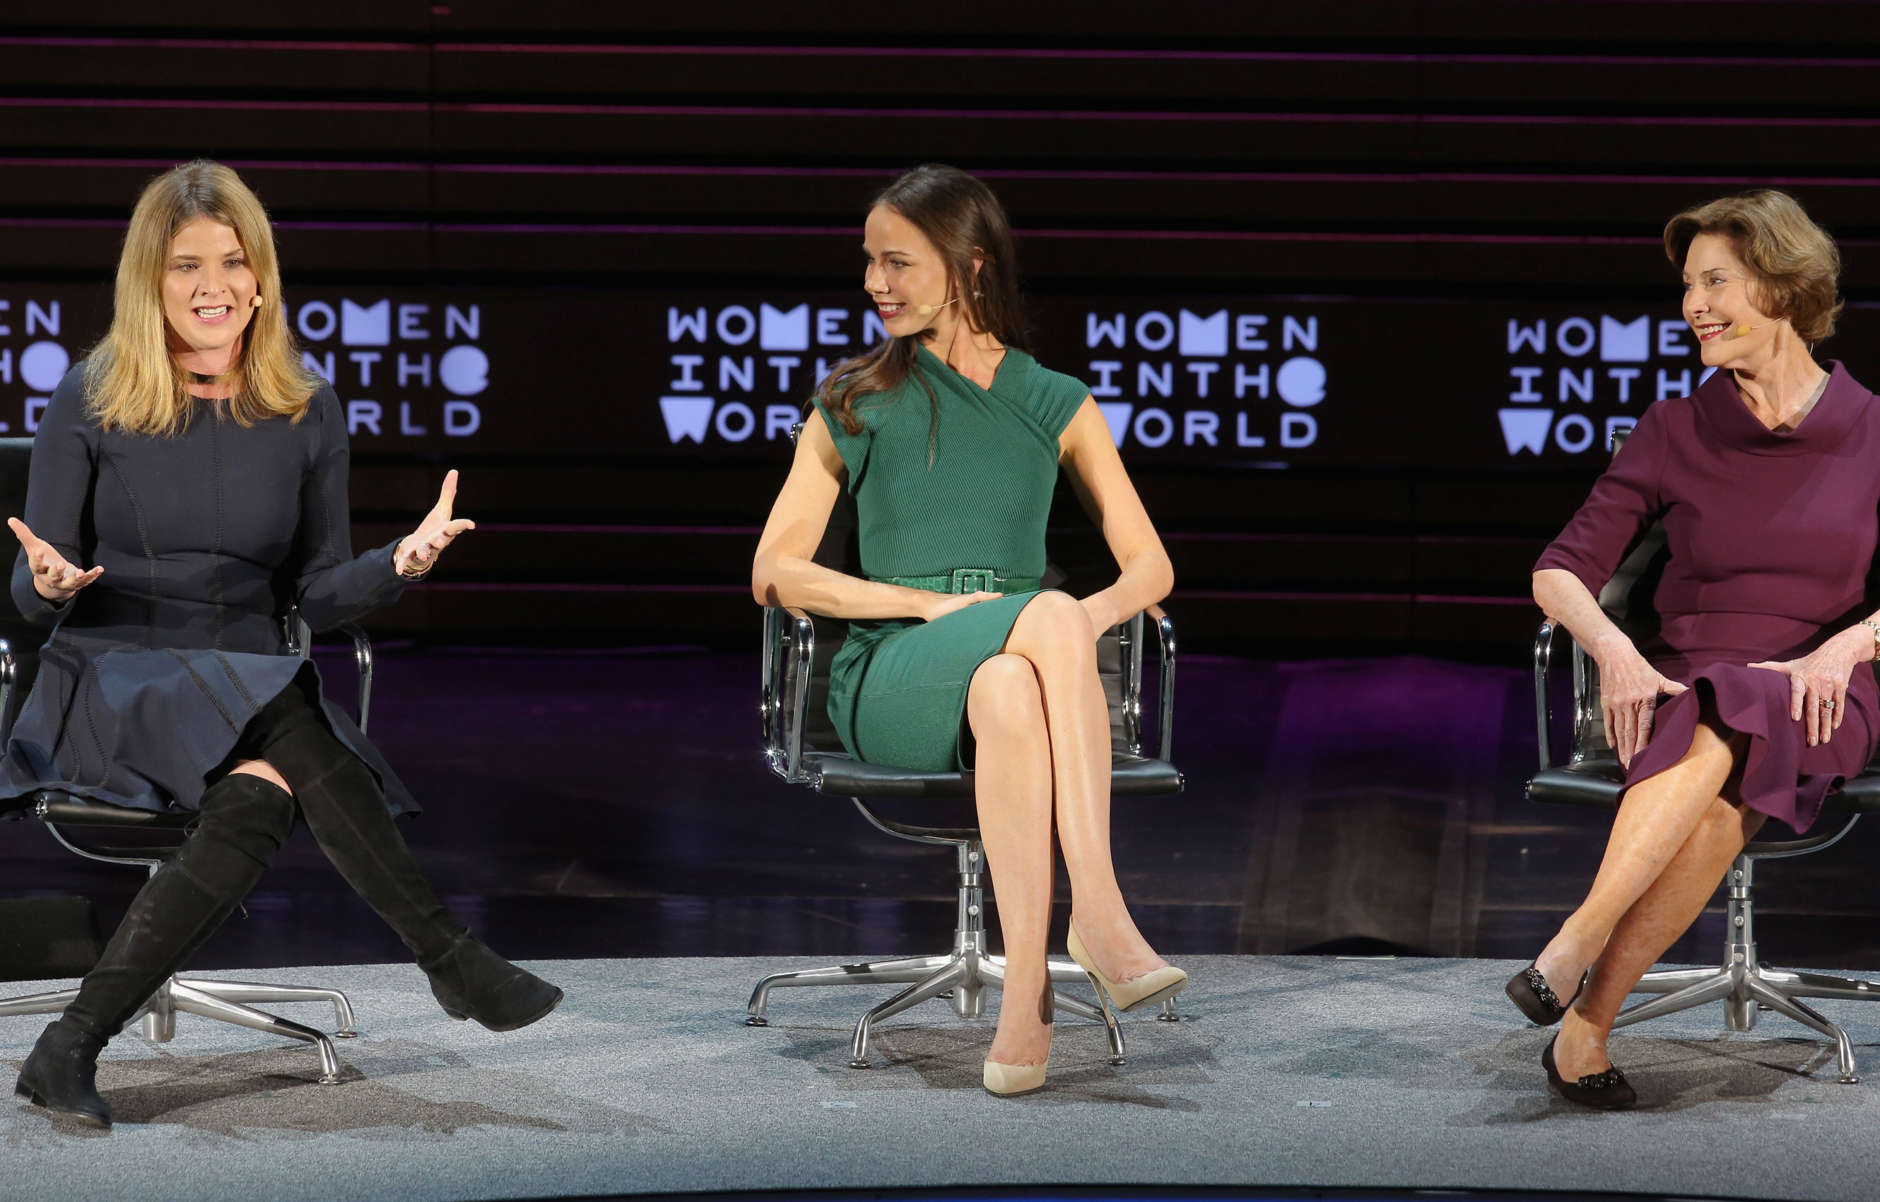 Jenna Bush Hager, Barbara Bush Jr. and former First Lady Laura Bush speak onstage at Mother/Daughter Dynasty: Two Generations of the Bush Family during Tina Brown's 7th Annual Women In The World Summit at David H. Koch Theater at Lincoln Center on April 7, 2016 in New York City. (Photo by Jemal Countess/Getty Images)